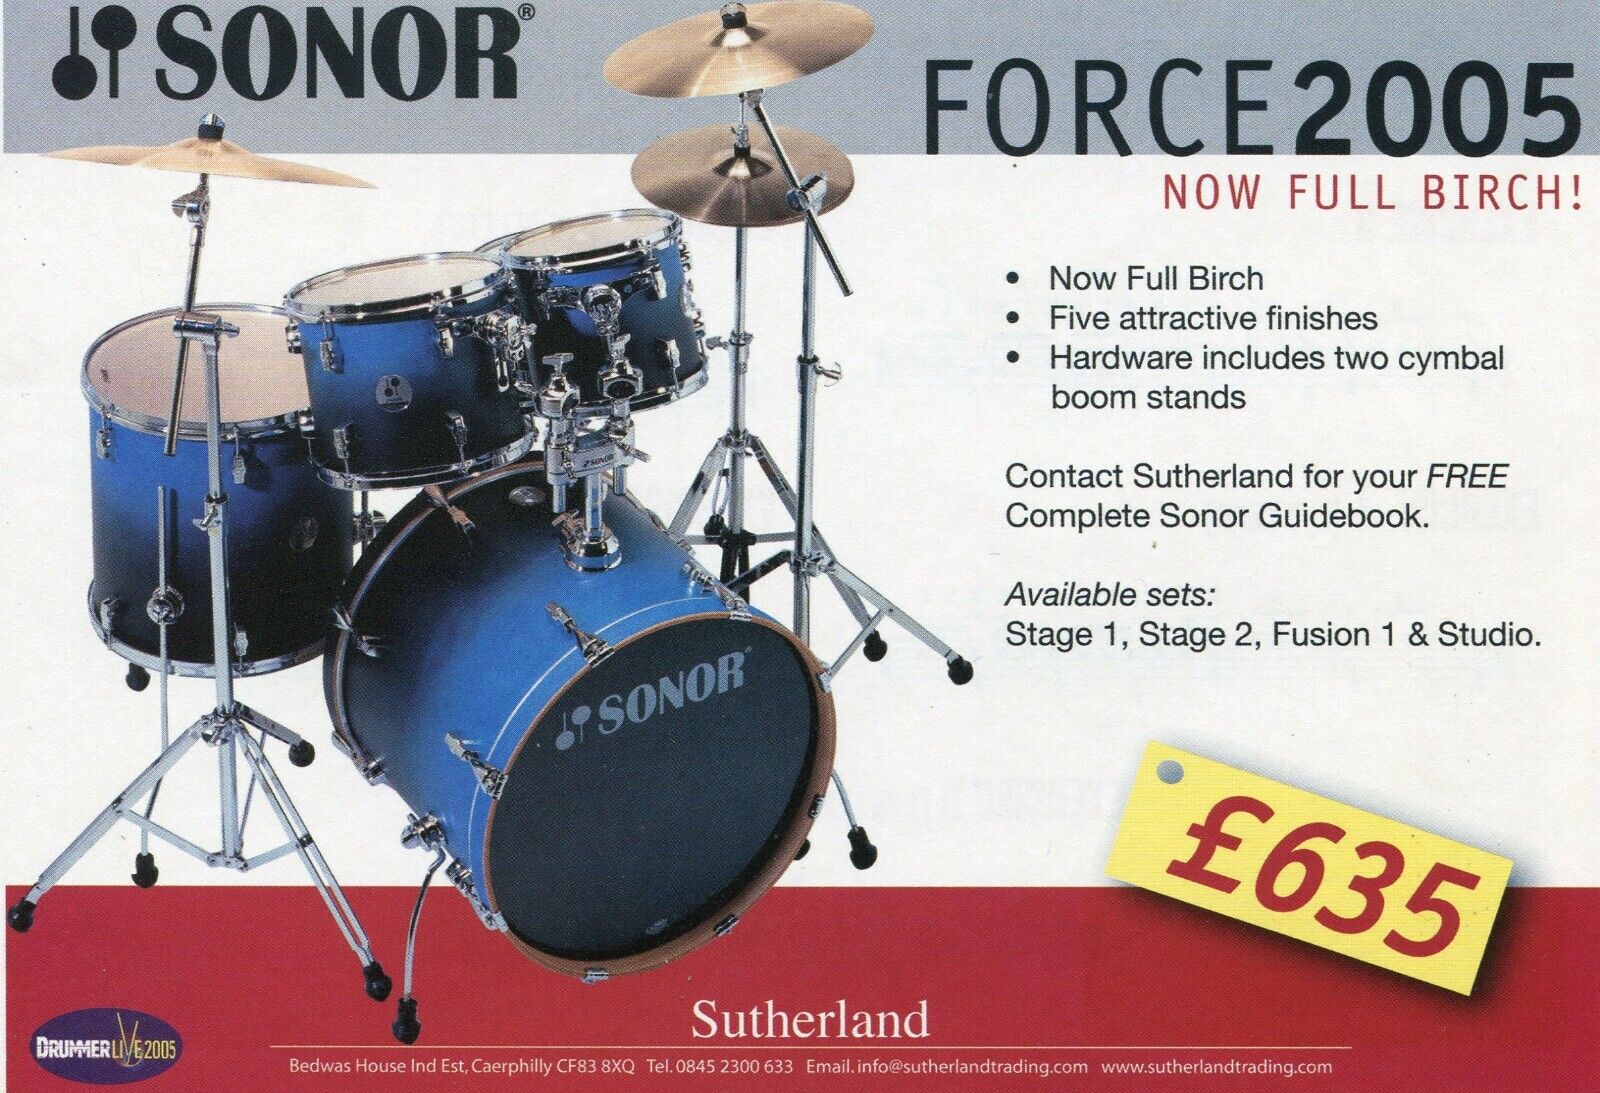 2005 small Print Ad of Sonor Force 2005 Full Birch Drum Kit Sutherland UK Ad